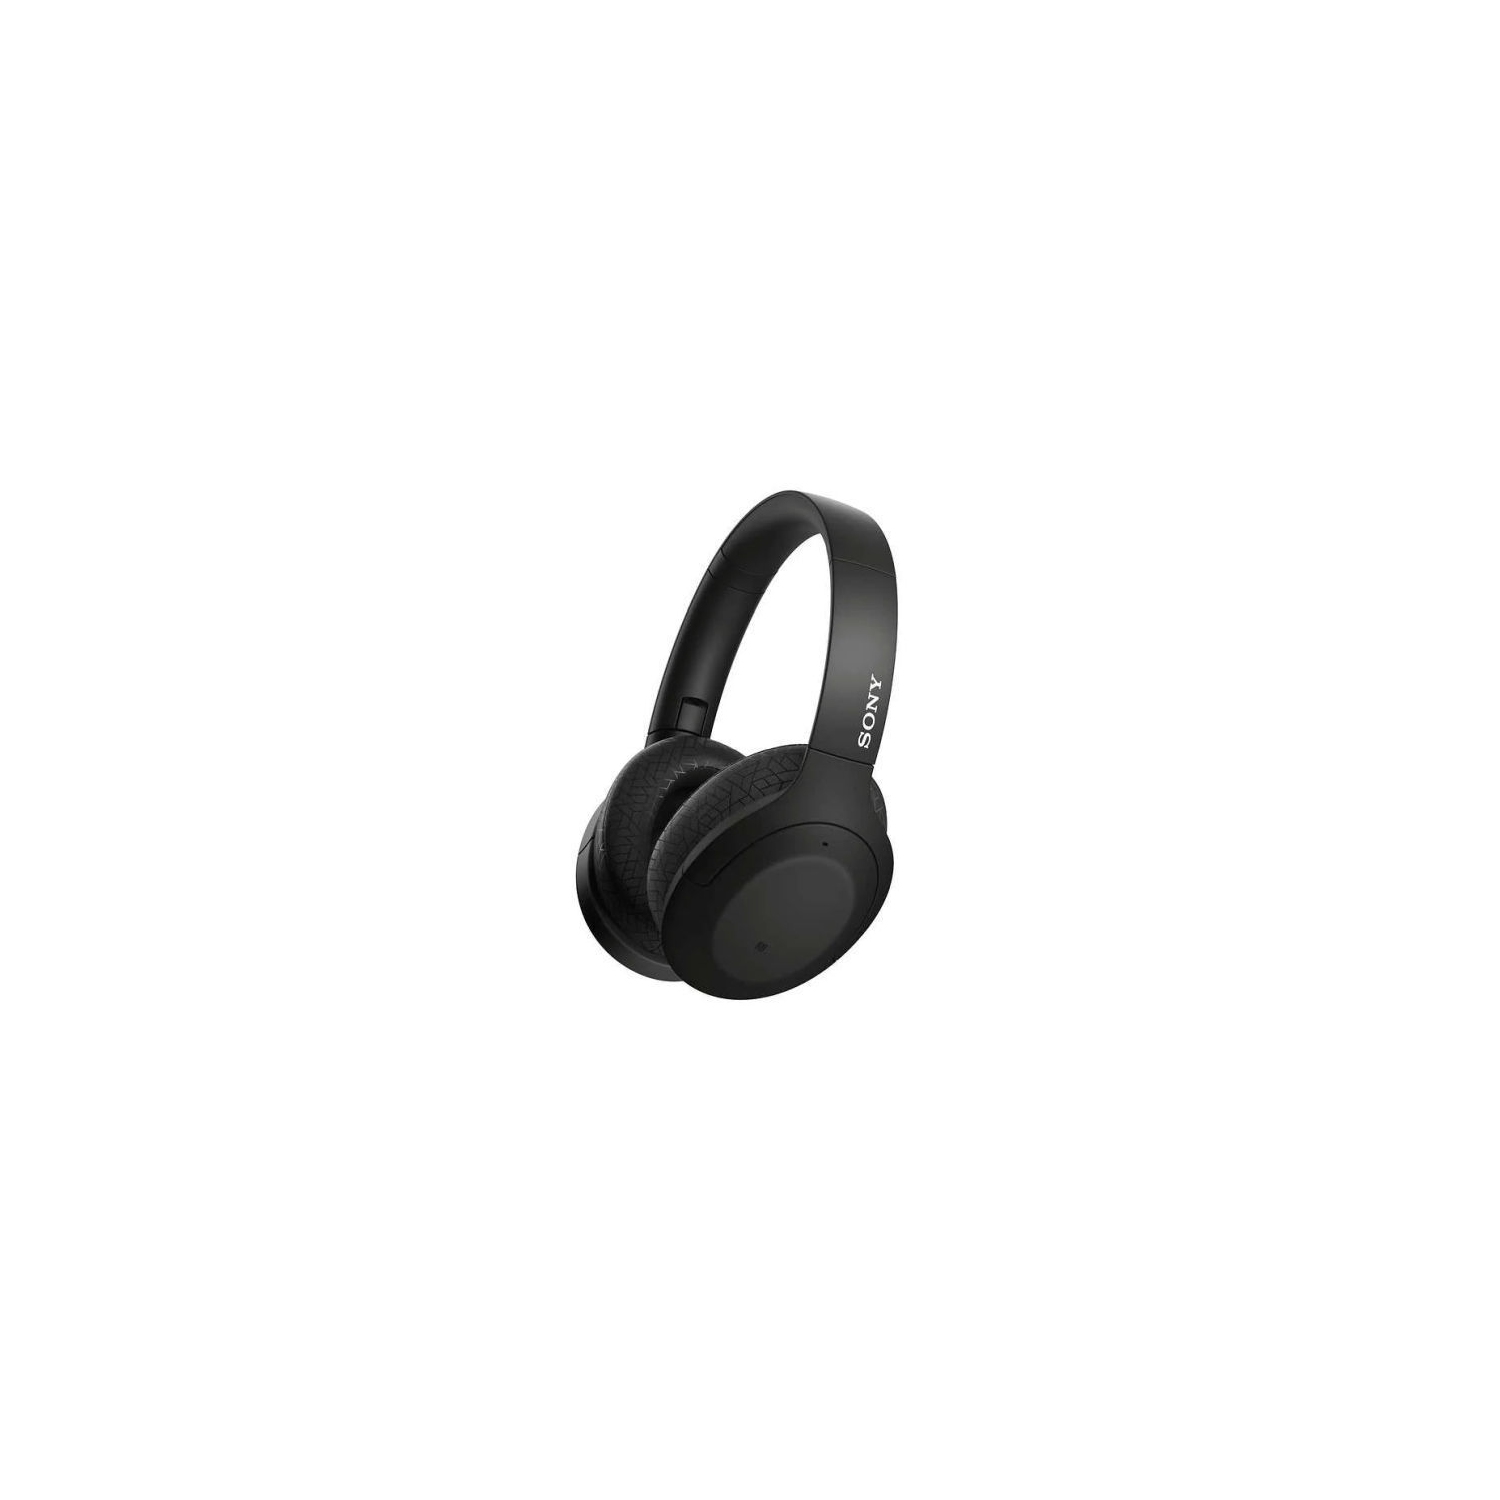 Refurbished (Excellent) - Sony Wh-H910n Bluetooth Noise-Cancelling Headphones - Certified Refurbished